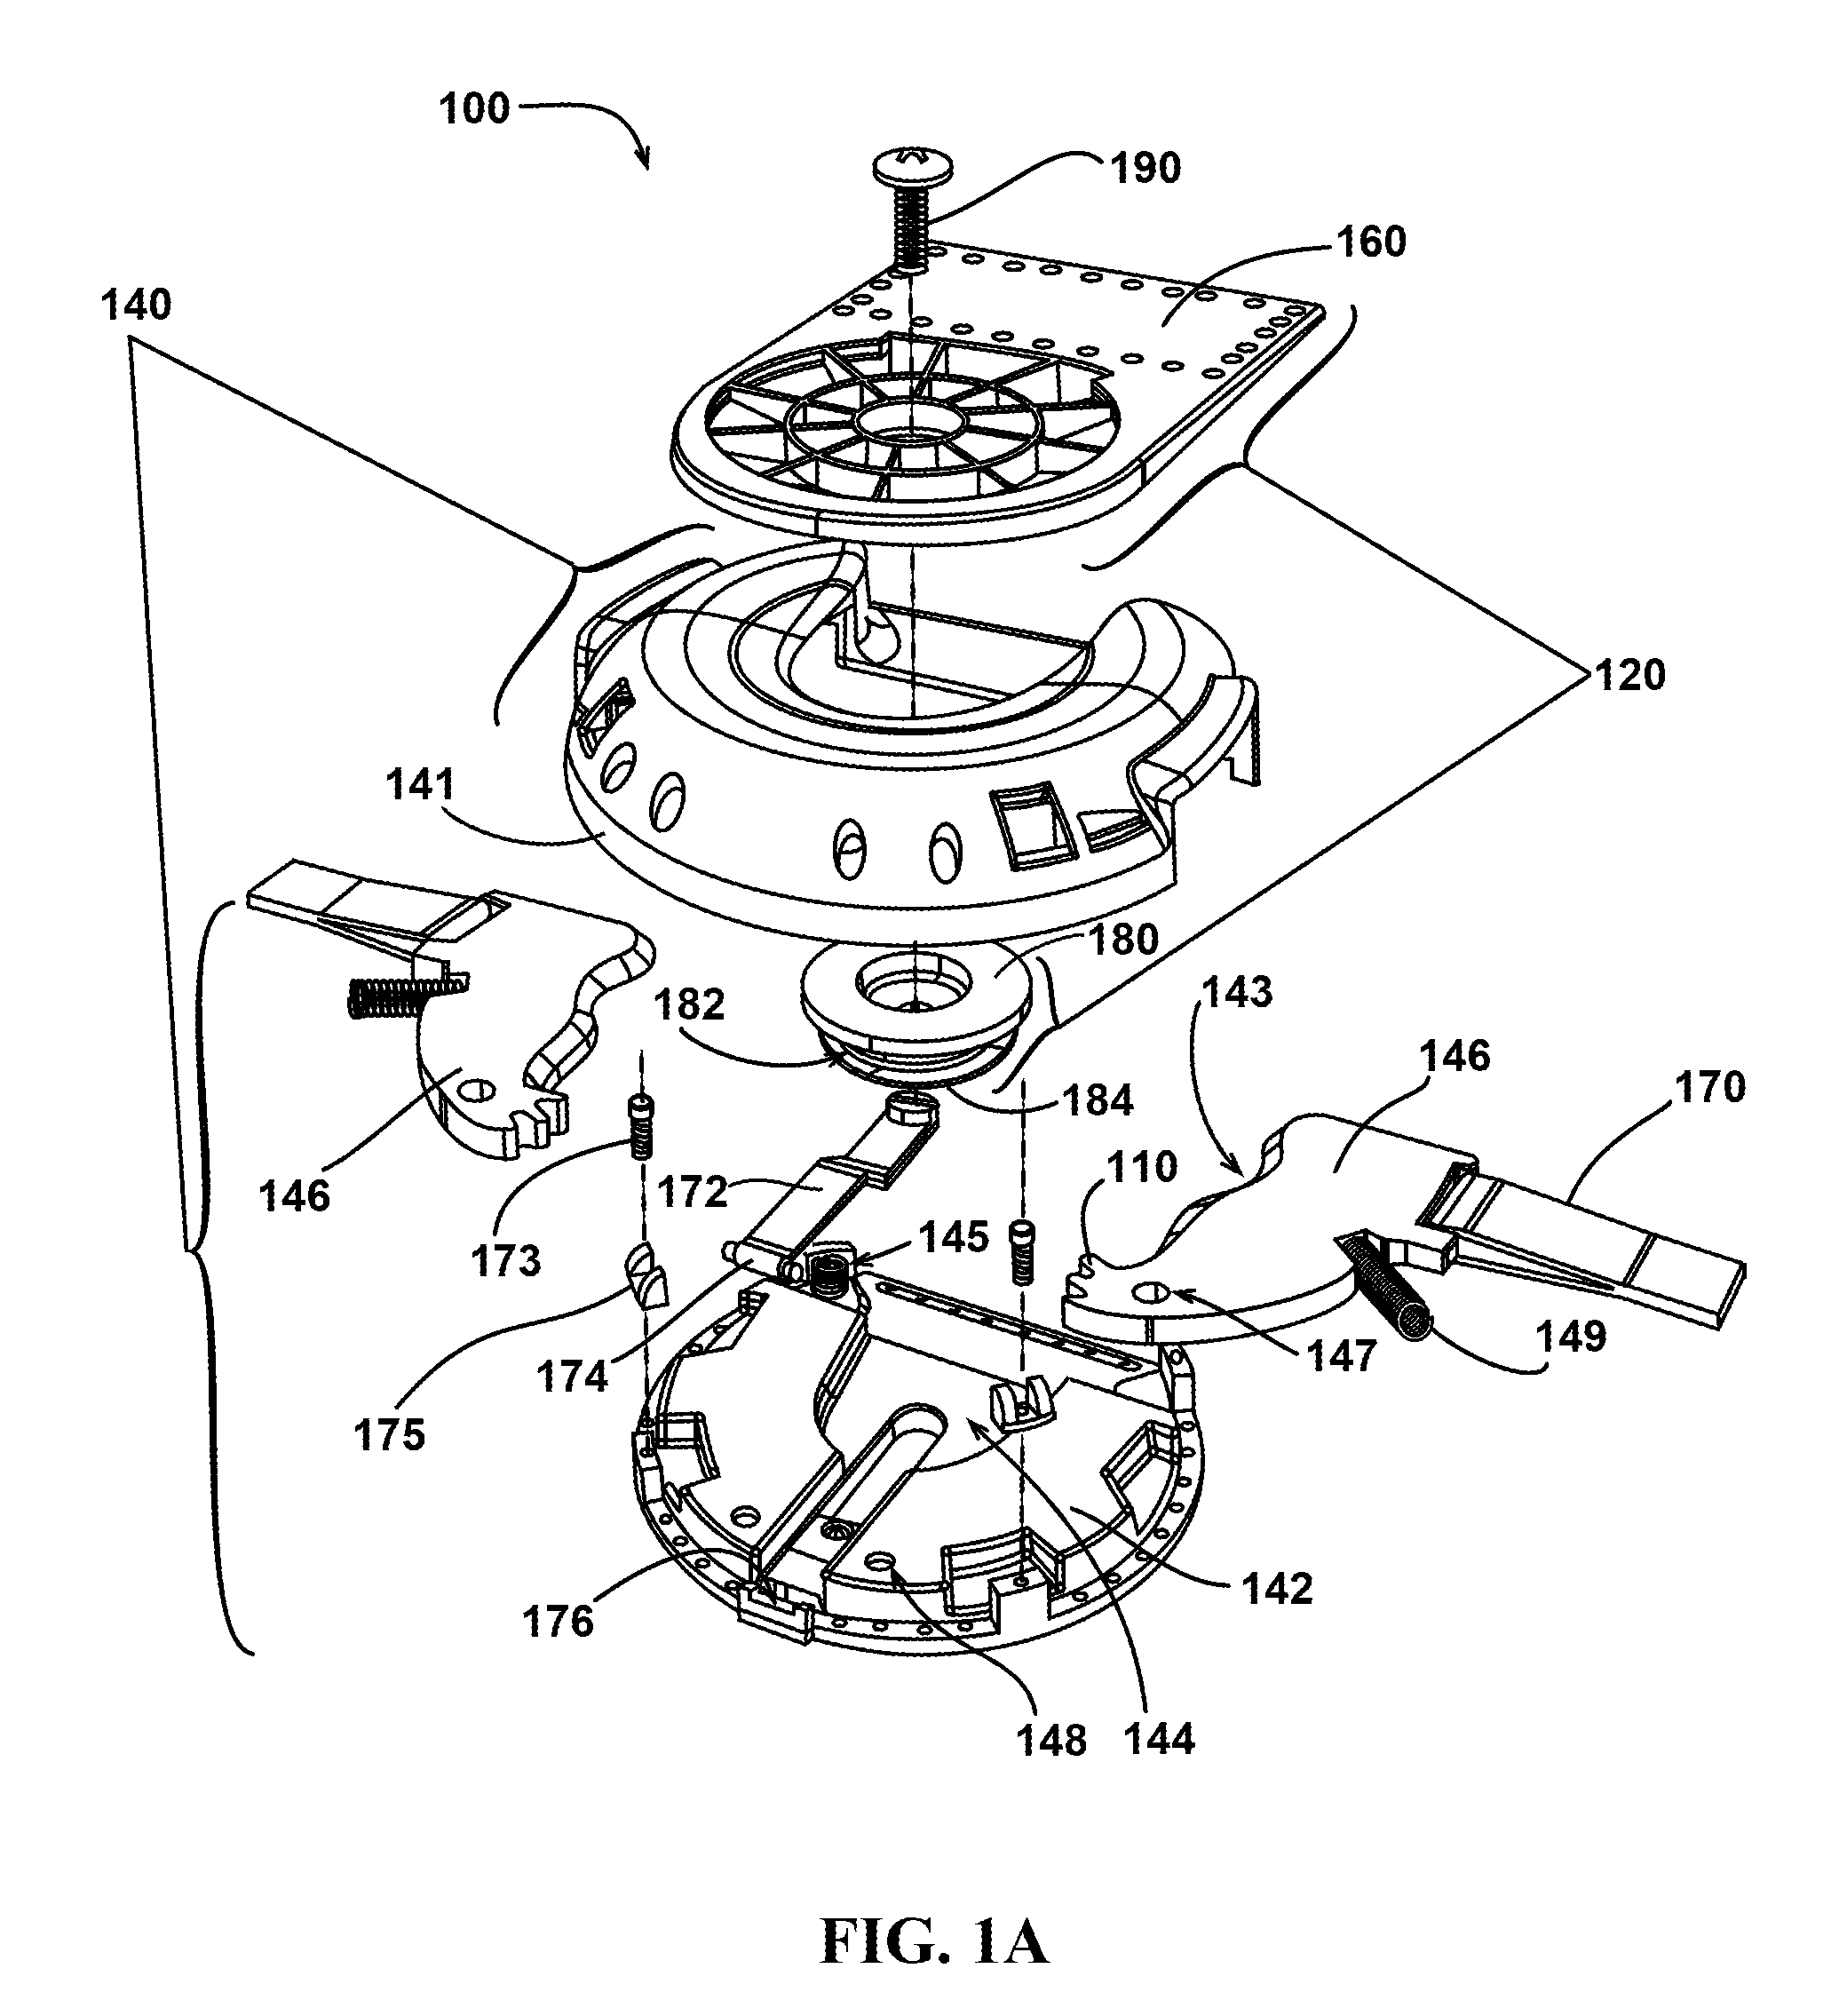 Load carriage connector and system